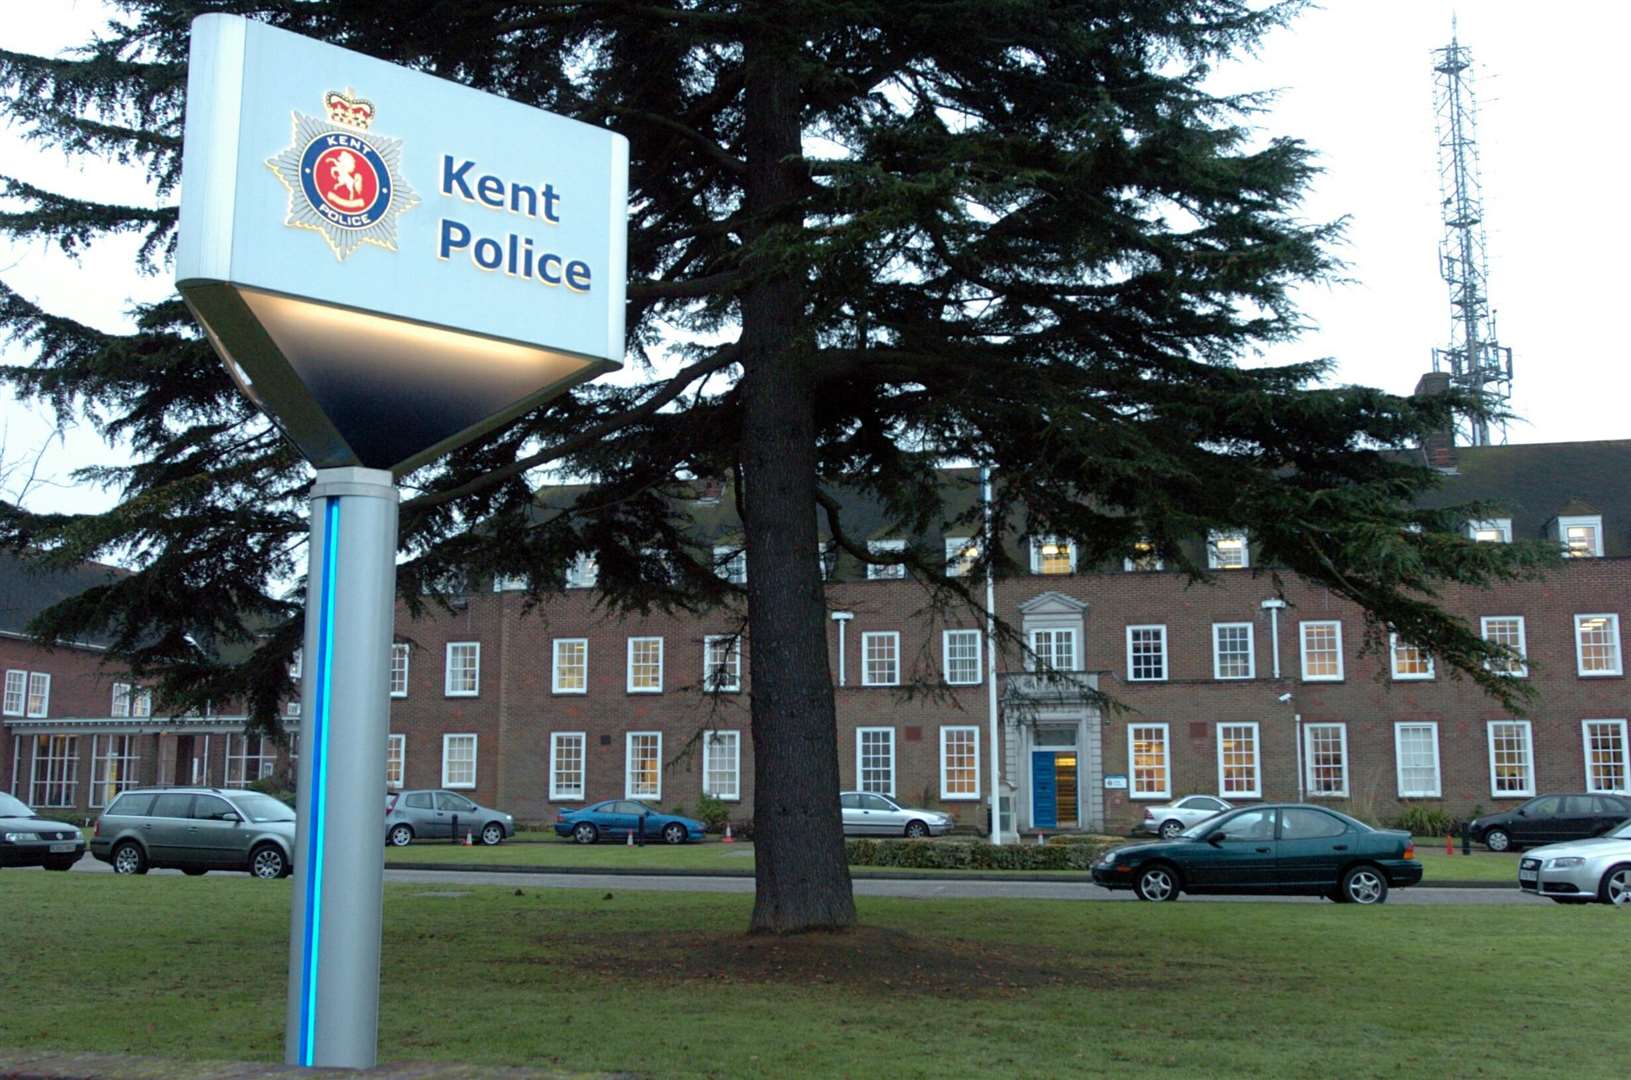 The Kent Police headquarters in Maidstone